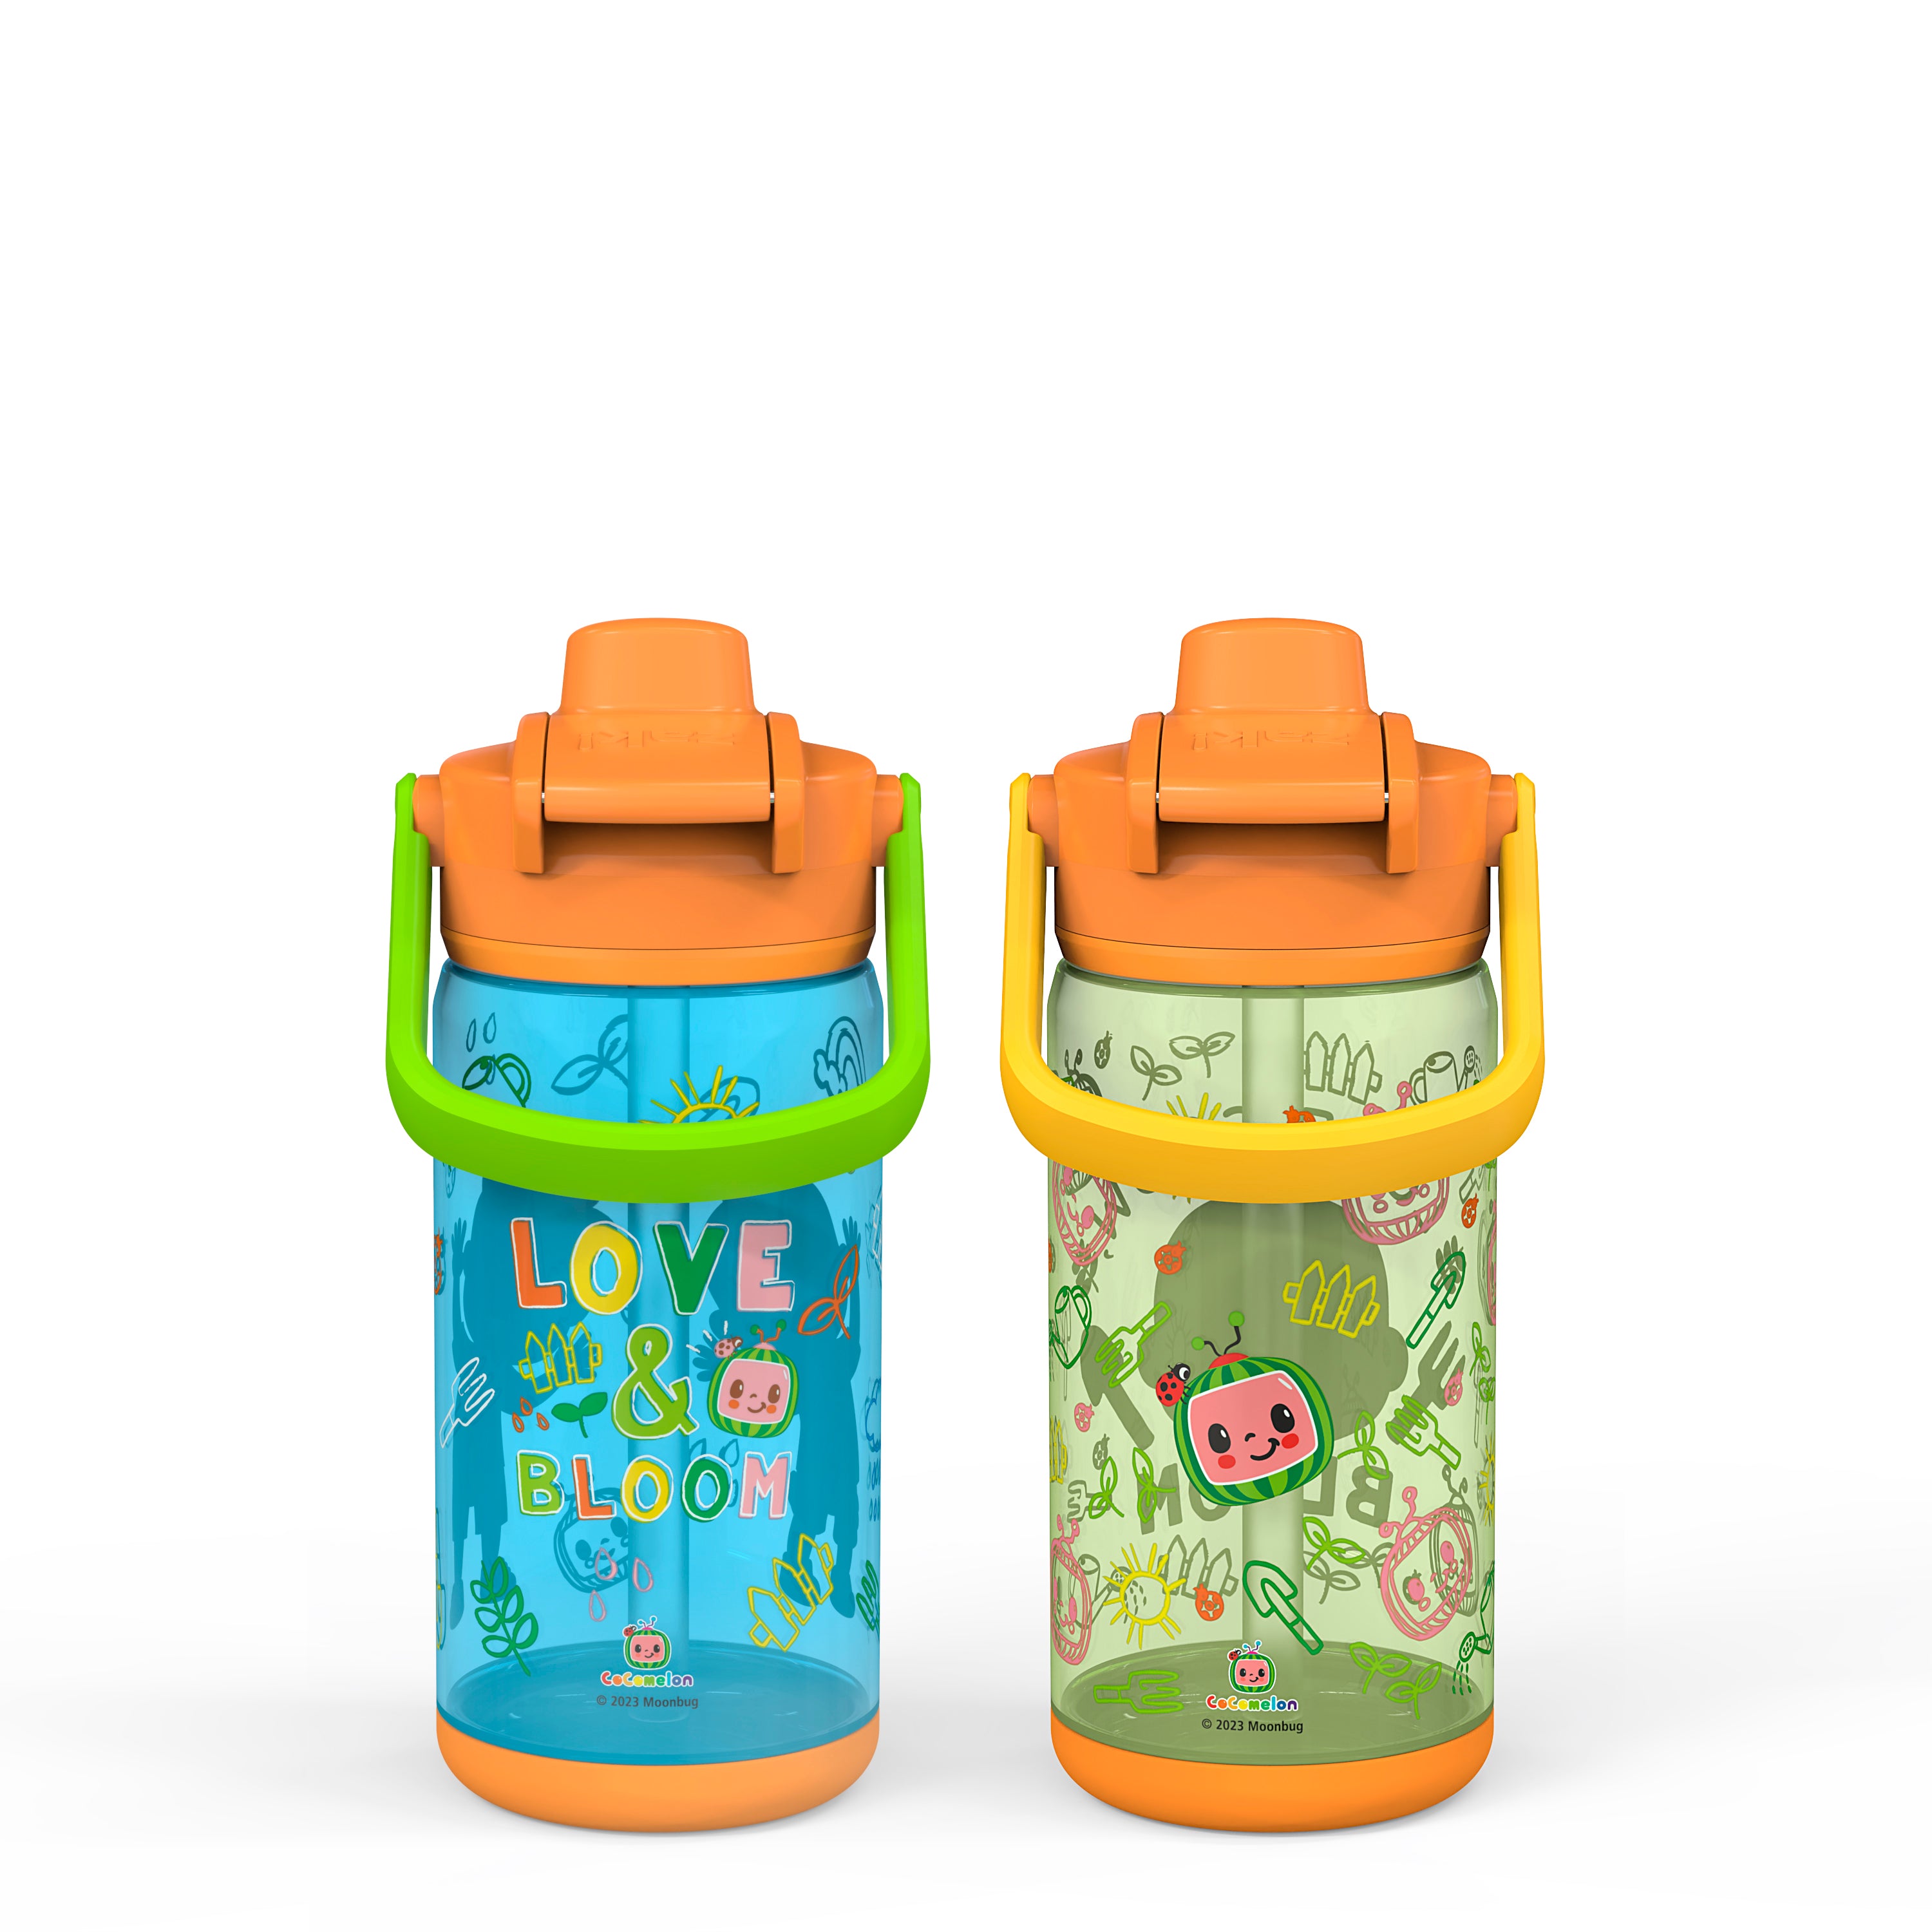 Beacon 2-Piece Kids Water Bottle Set with Covered Spout - Unicorn and Flower Power, 16 Ounces